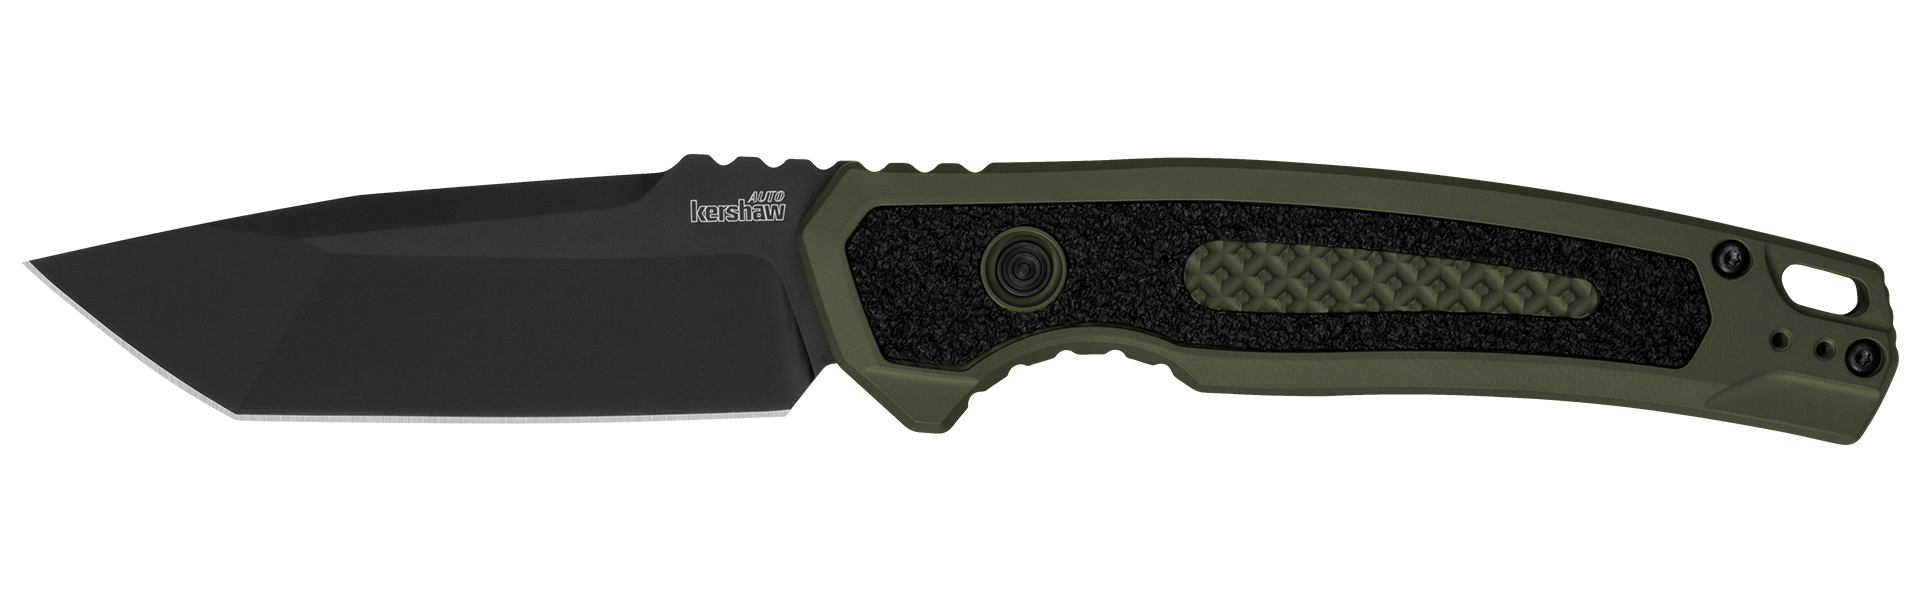 Kershaw Launch 16 - Automatic - OD Green Aluminum Handle with TracTec Inlay - CPM-M4 Steel - 7105OLBK